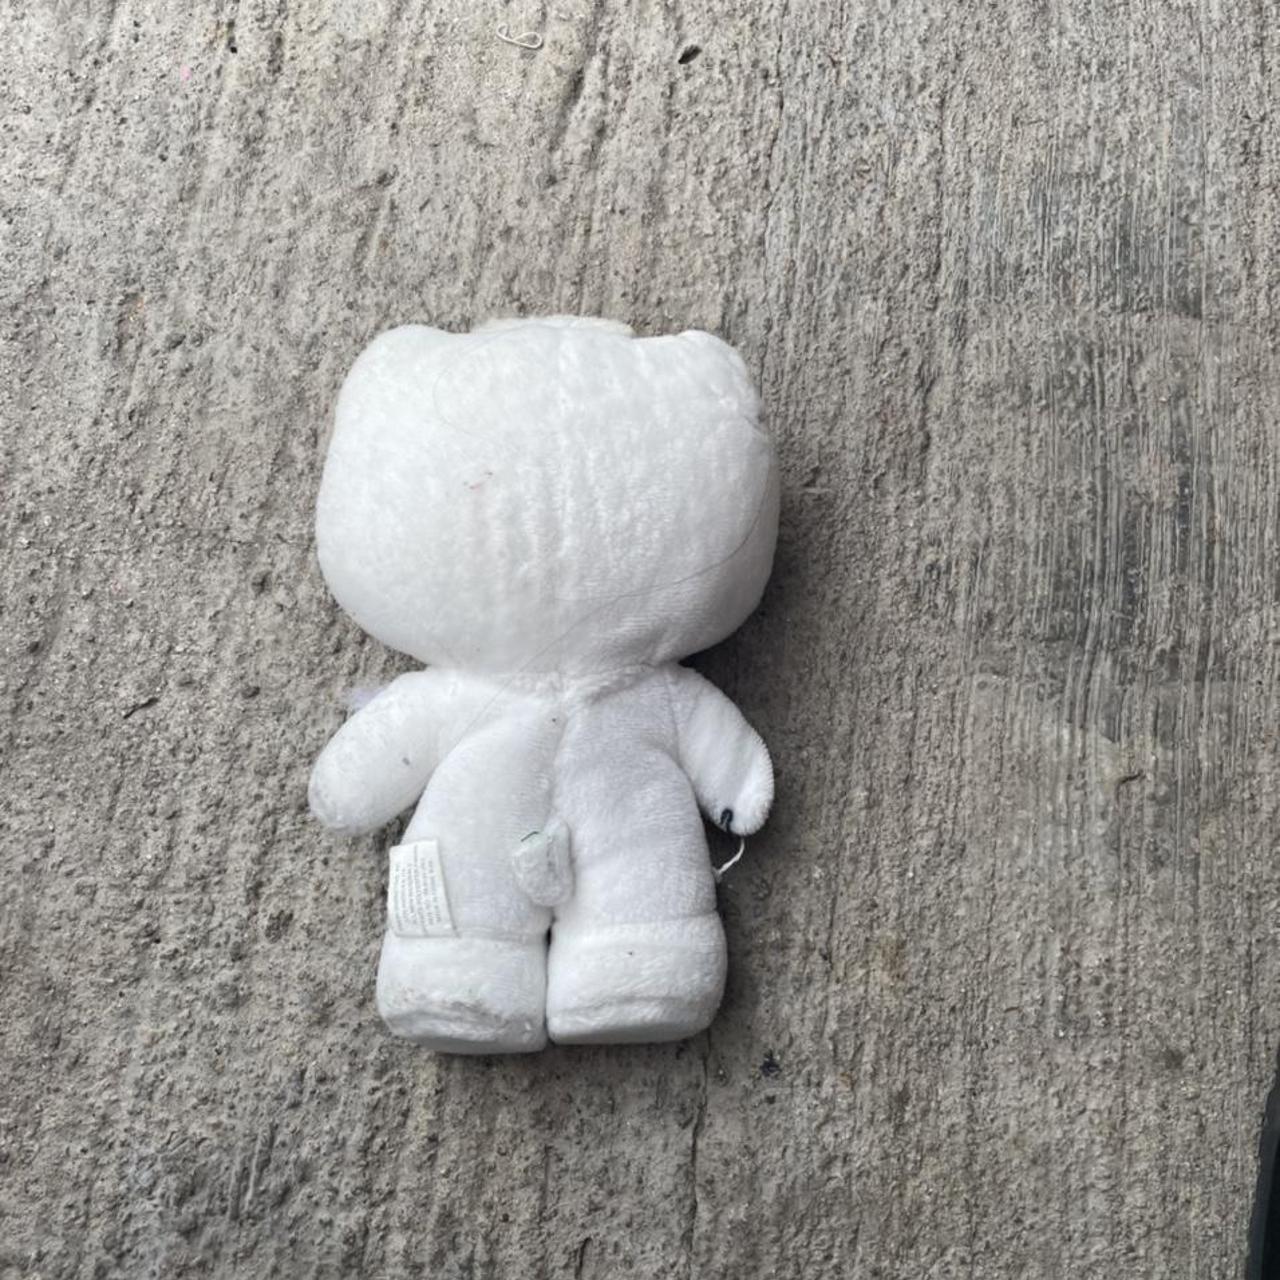 Product Image 2 - Vintage 1999 Hello Kitty Plush
All